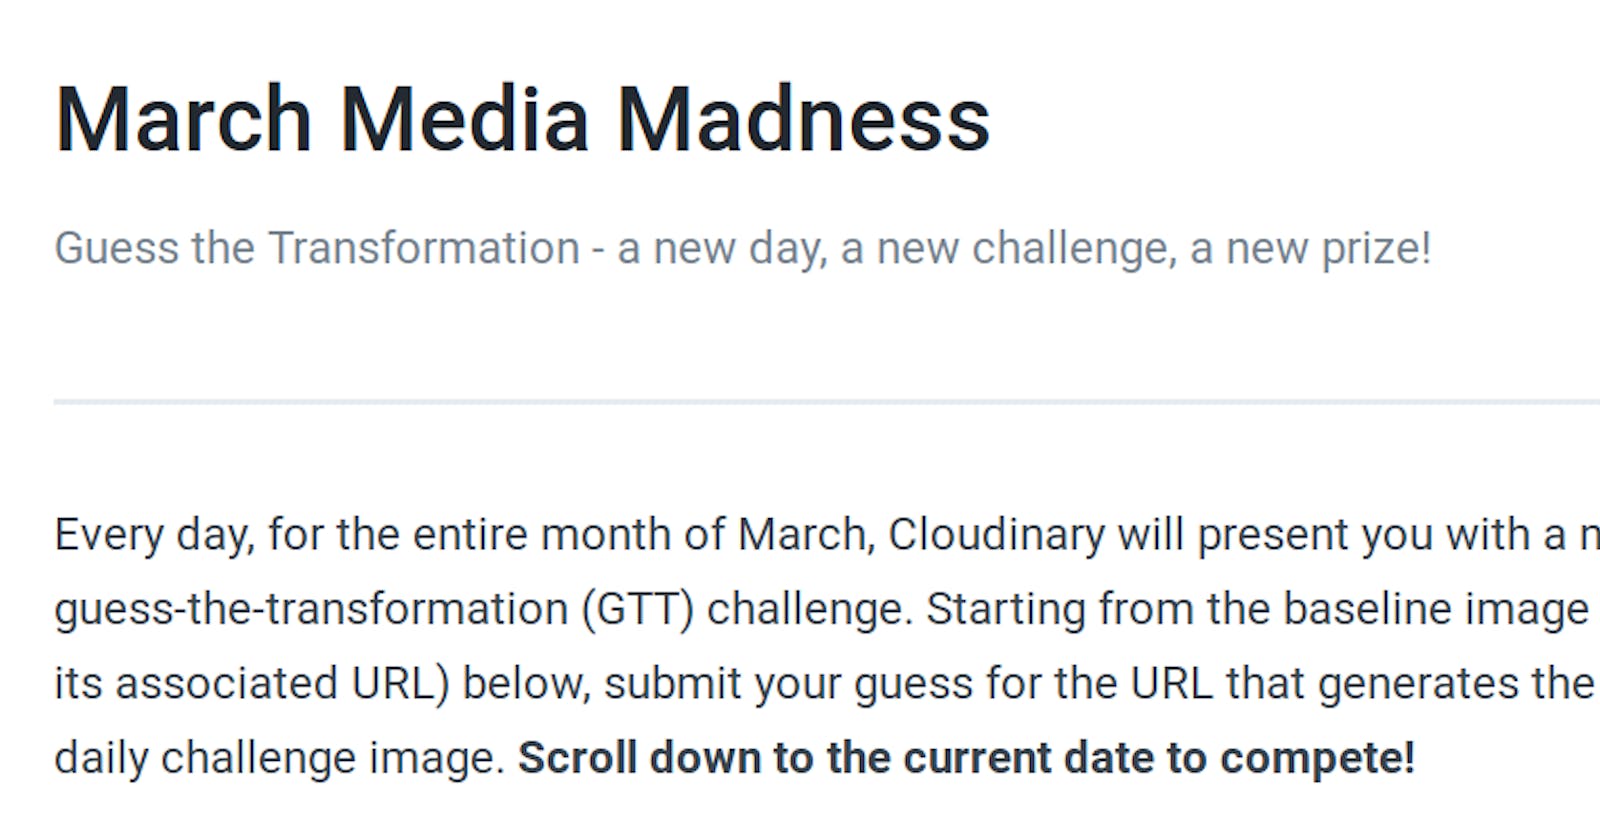 March Media Madness Takeaways Part I [Yet Another Cloudinary Blog Post]